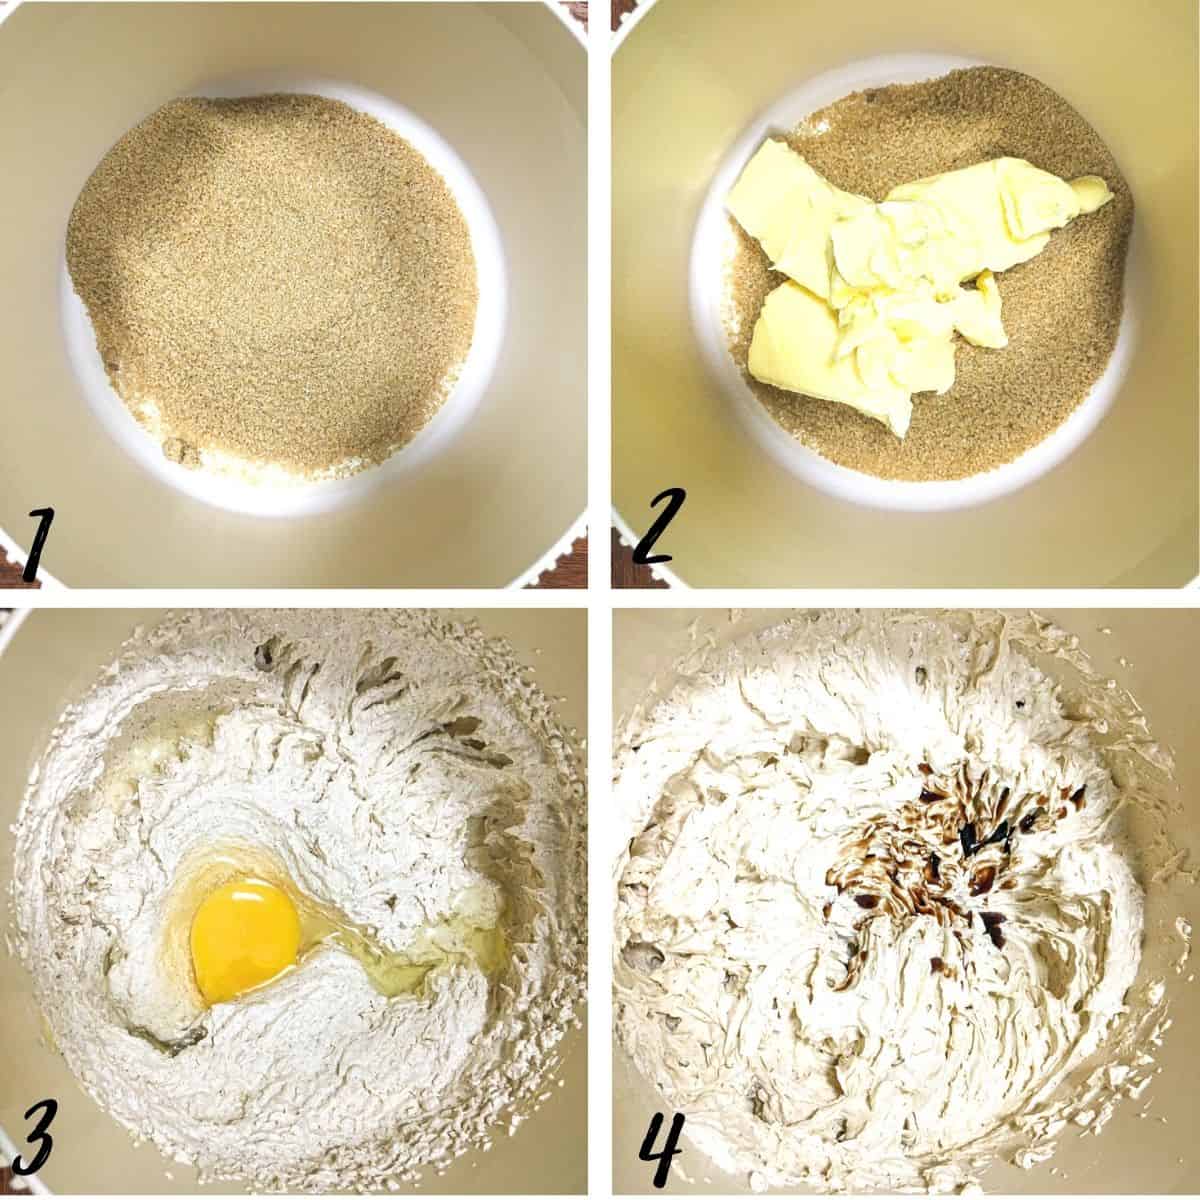 A poster of 4 images showing how to mix cake batter.